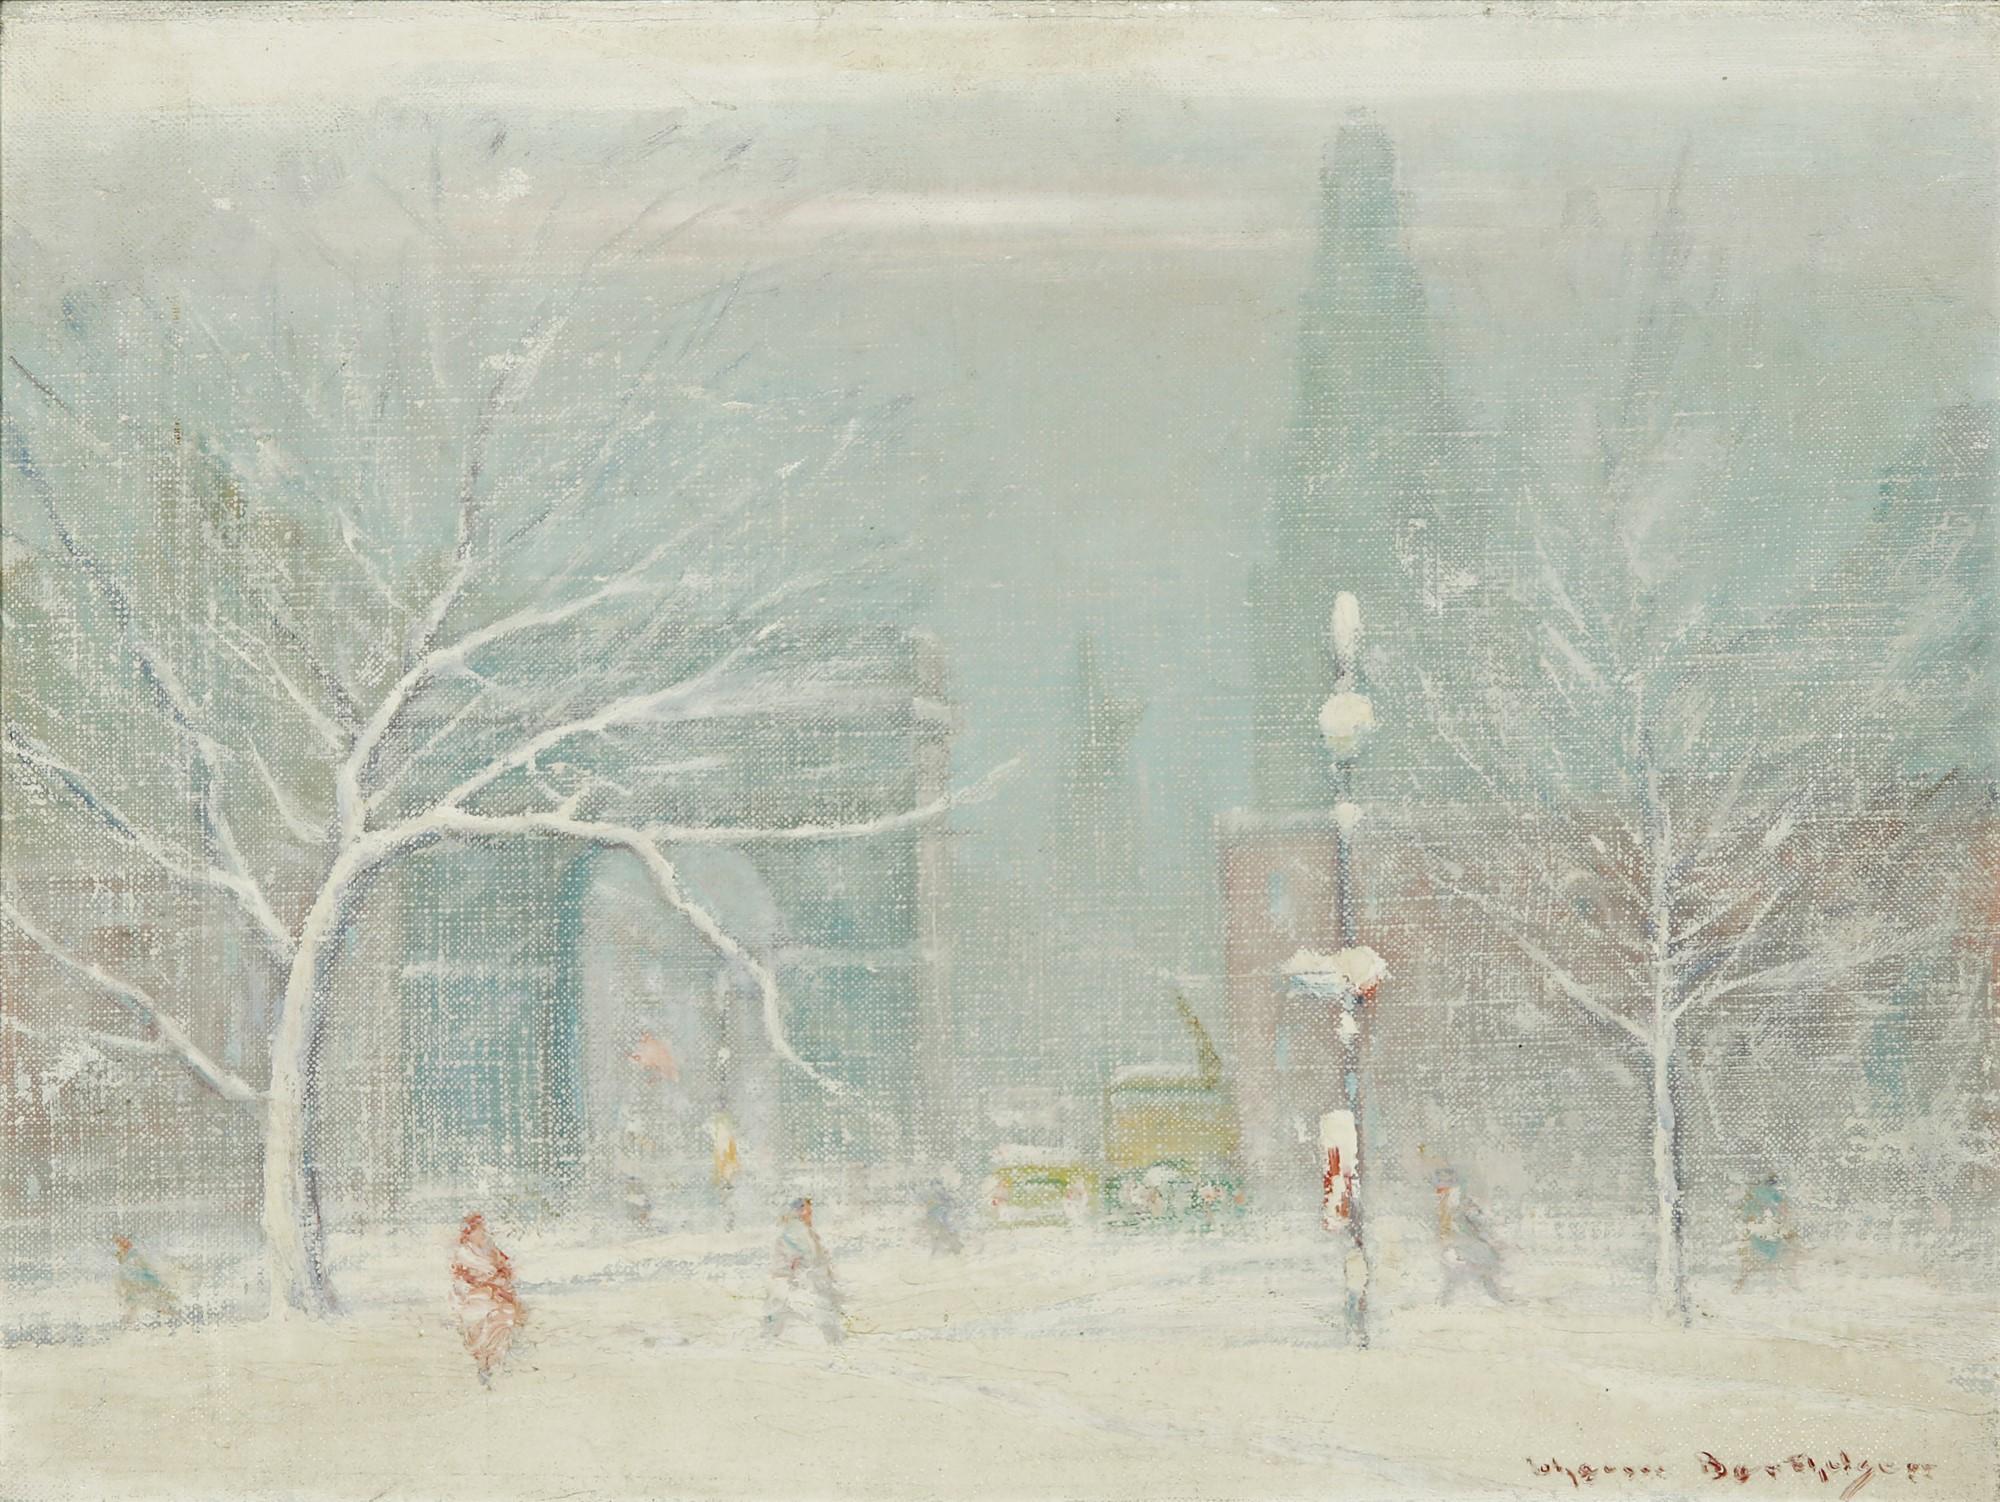 This wonderful romantic painting depicts figures bustling along a Manhattan street during a snowstorm. Signed lower right.

Johann Henrik Carl Berthelsen (1883–1972)
Coming to America as a child, he enjoyed early success as an opera singer and